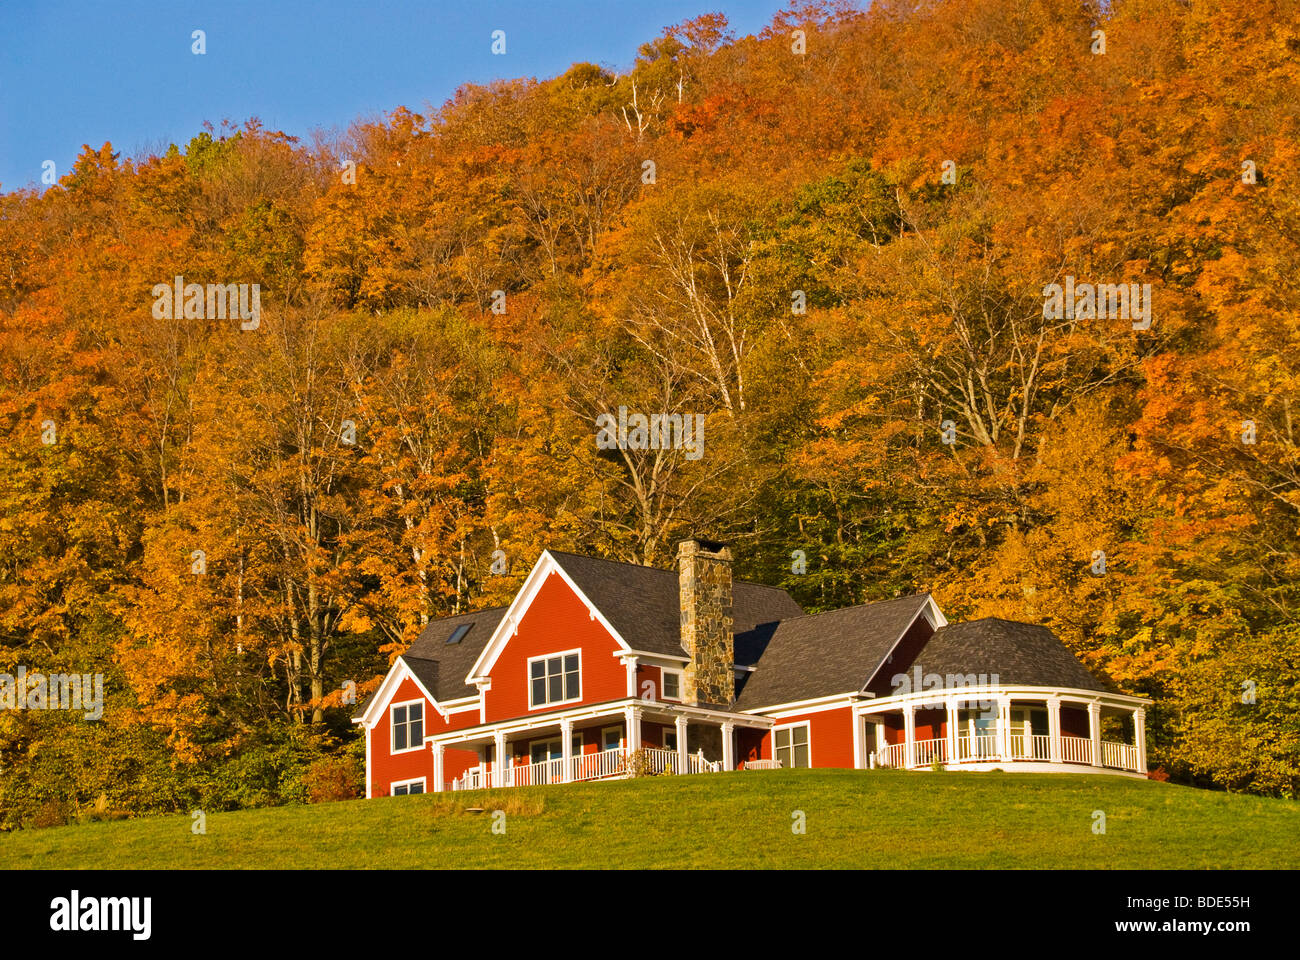 Vermont in the fall season Stock Photo